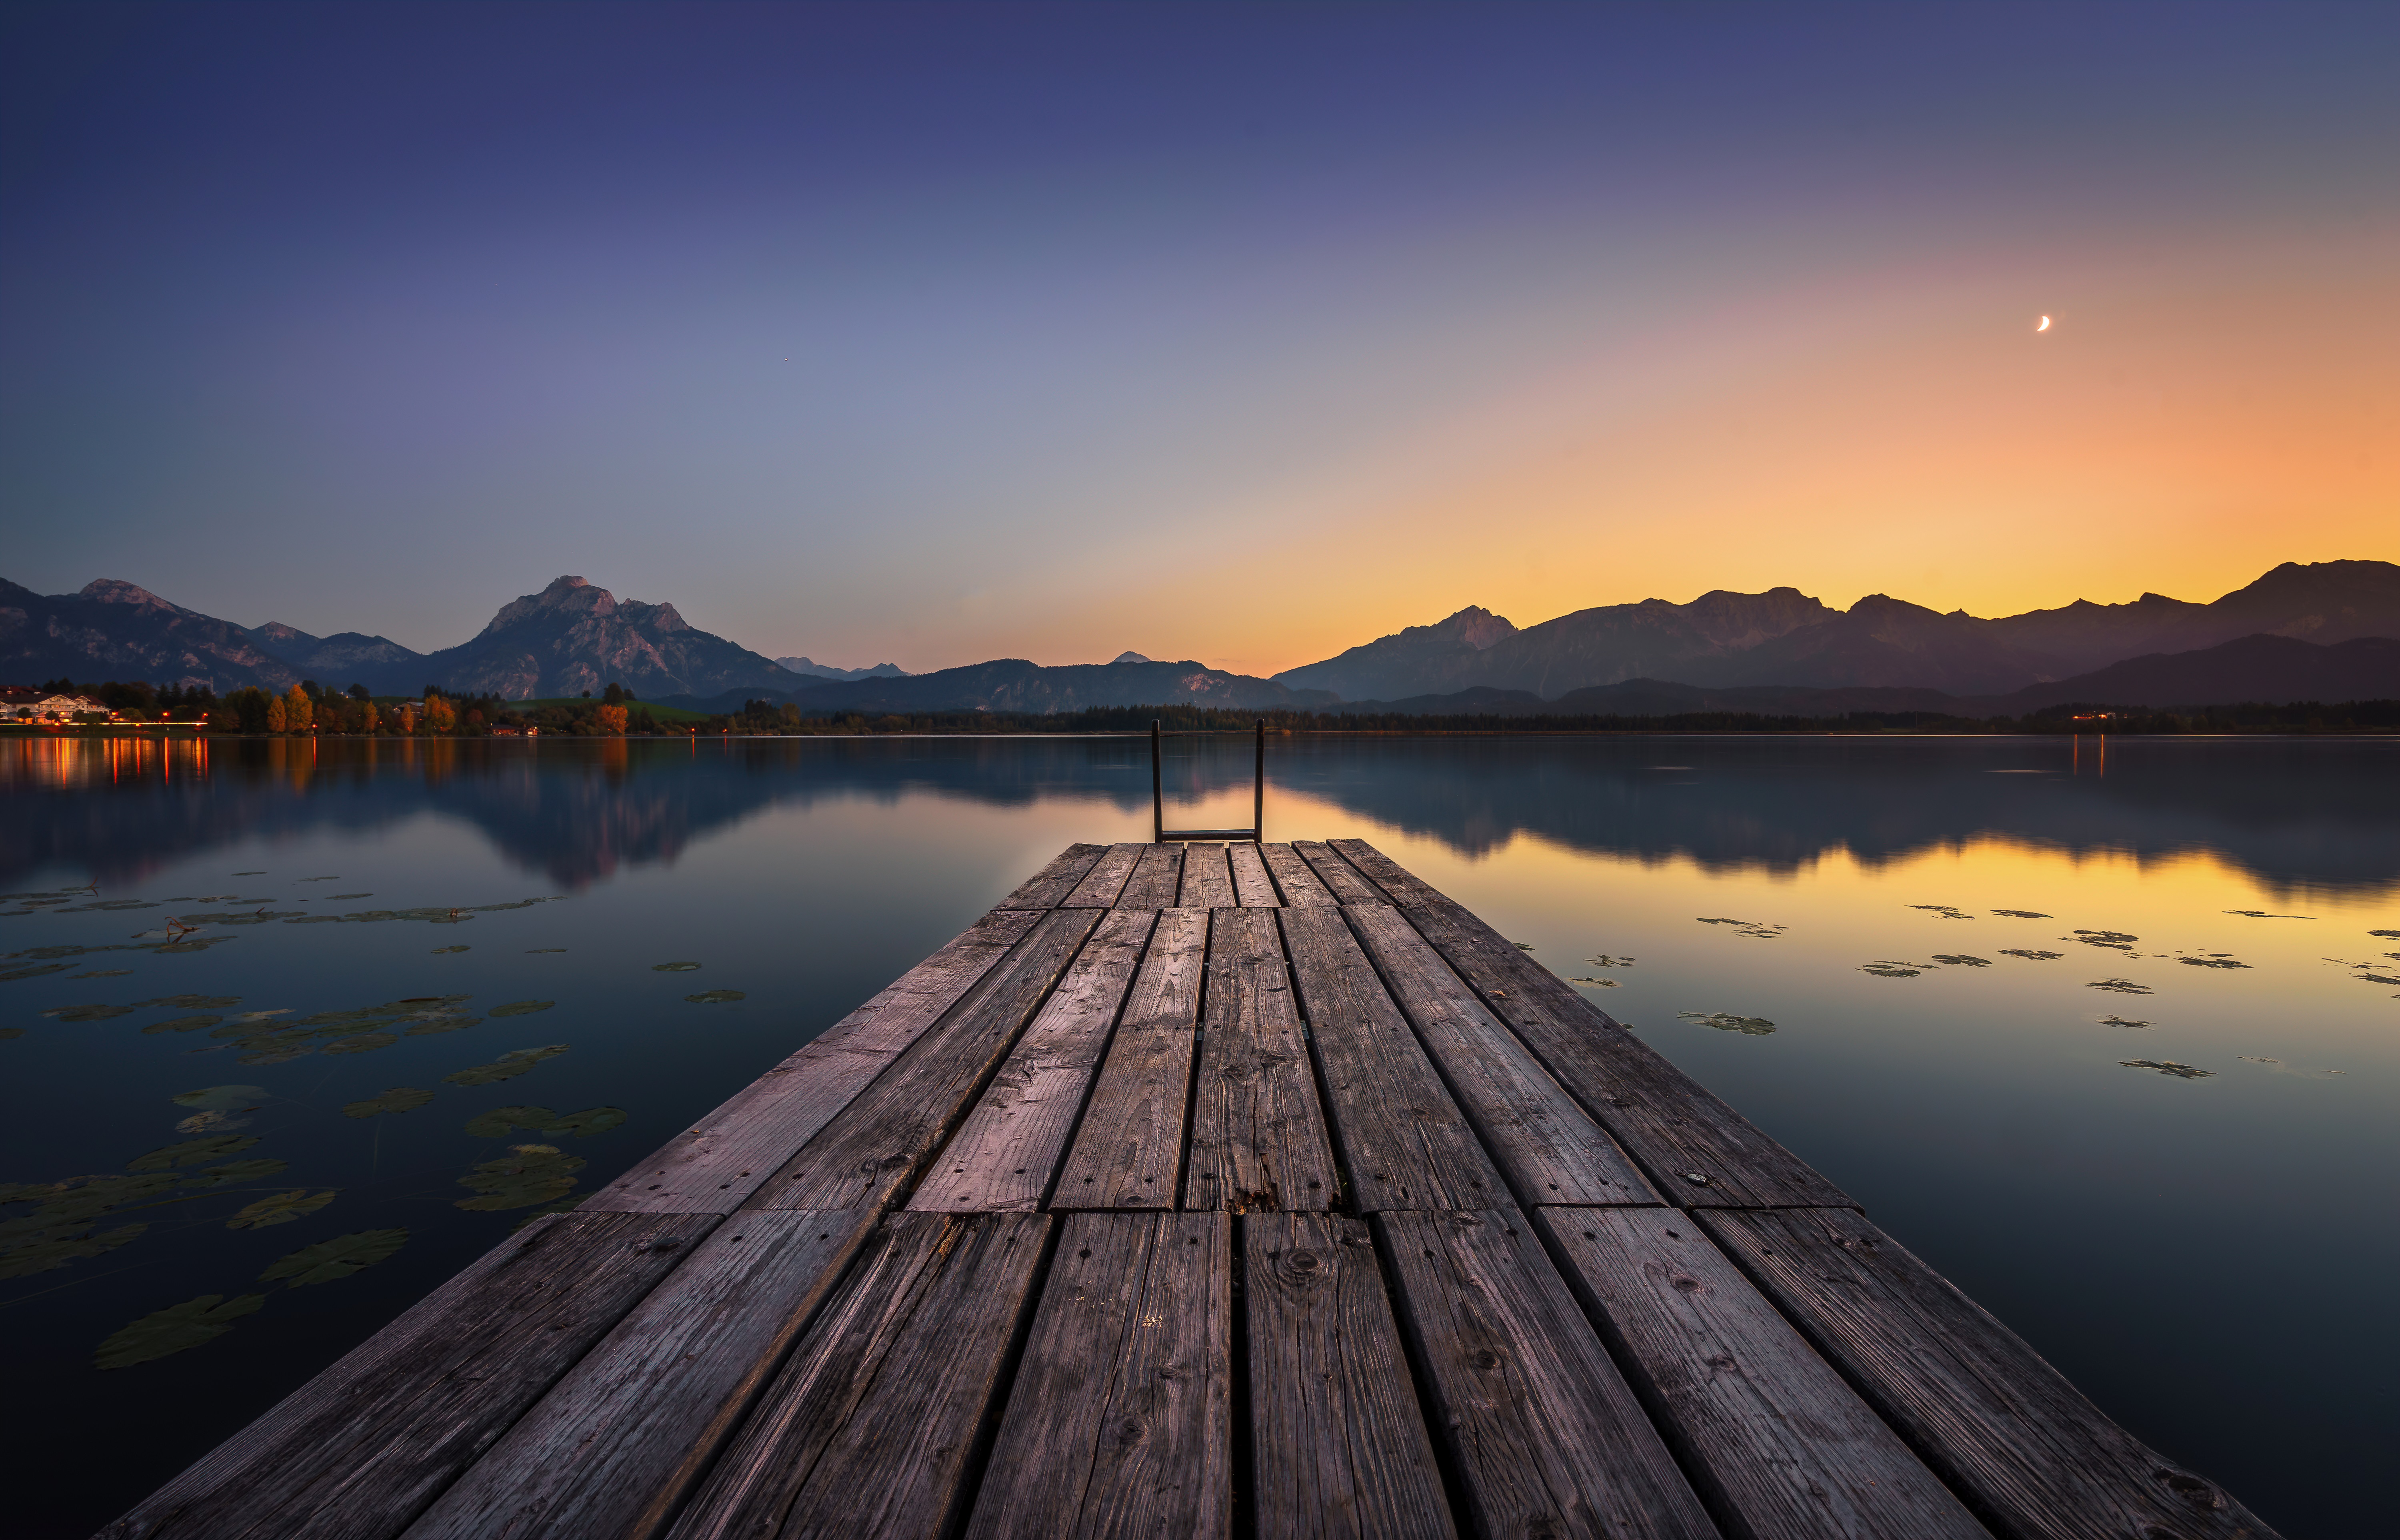 Timo Gebel Sunset Mountains Trees Water Pier Lily Pads Nature Outdoors Photography Ladder Reflection 6000x3851